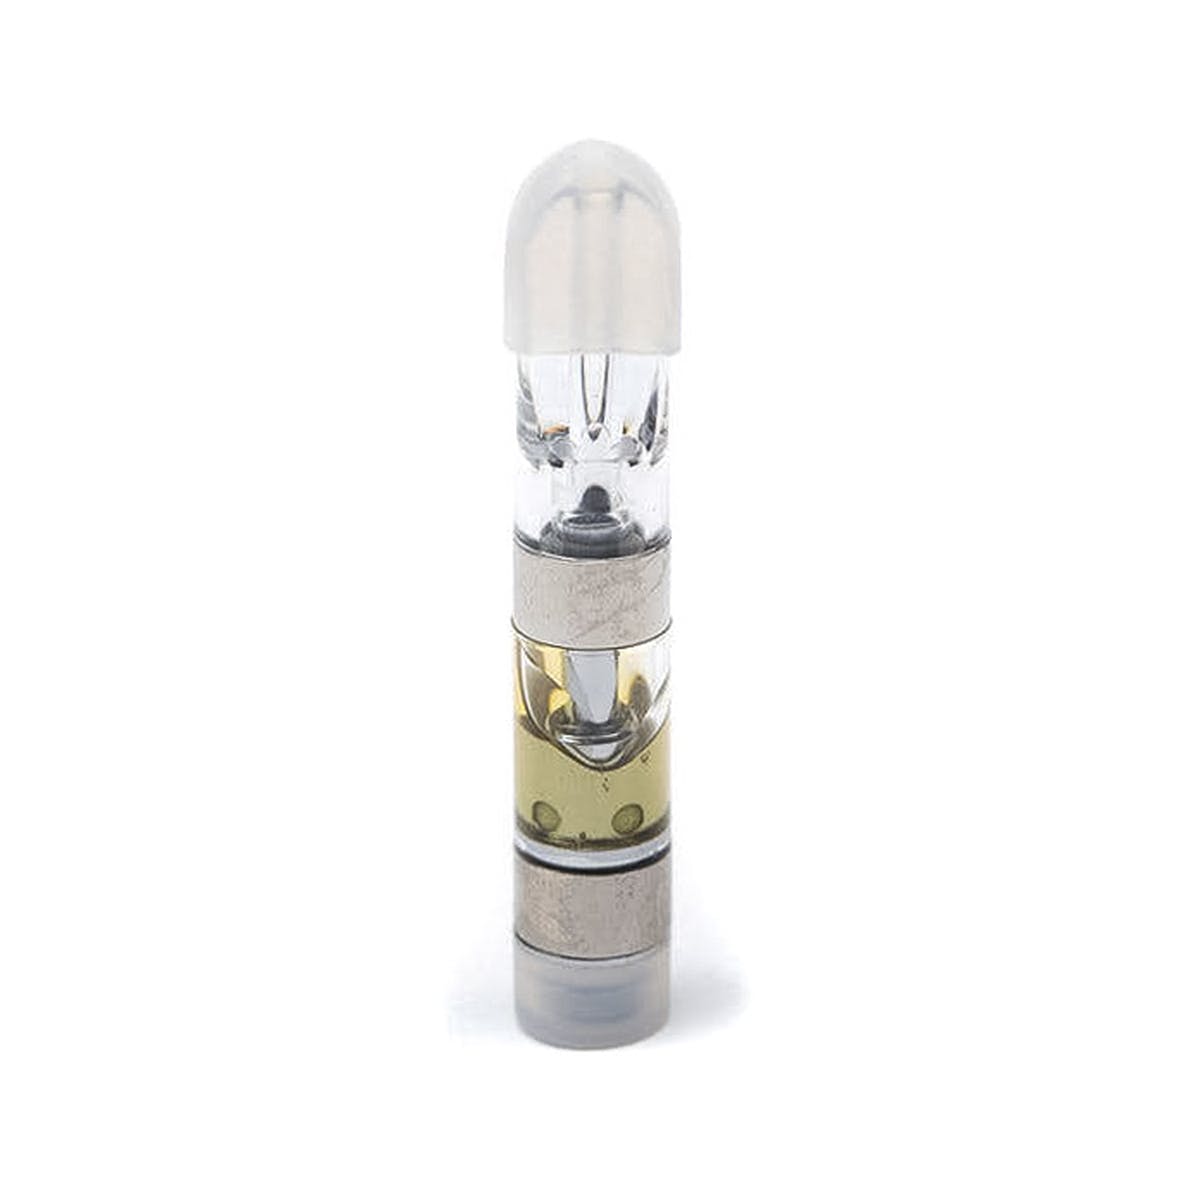 concentrate-wellness-connection-distillate-vape-cartridge